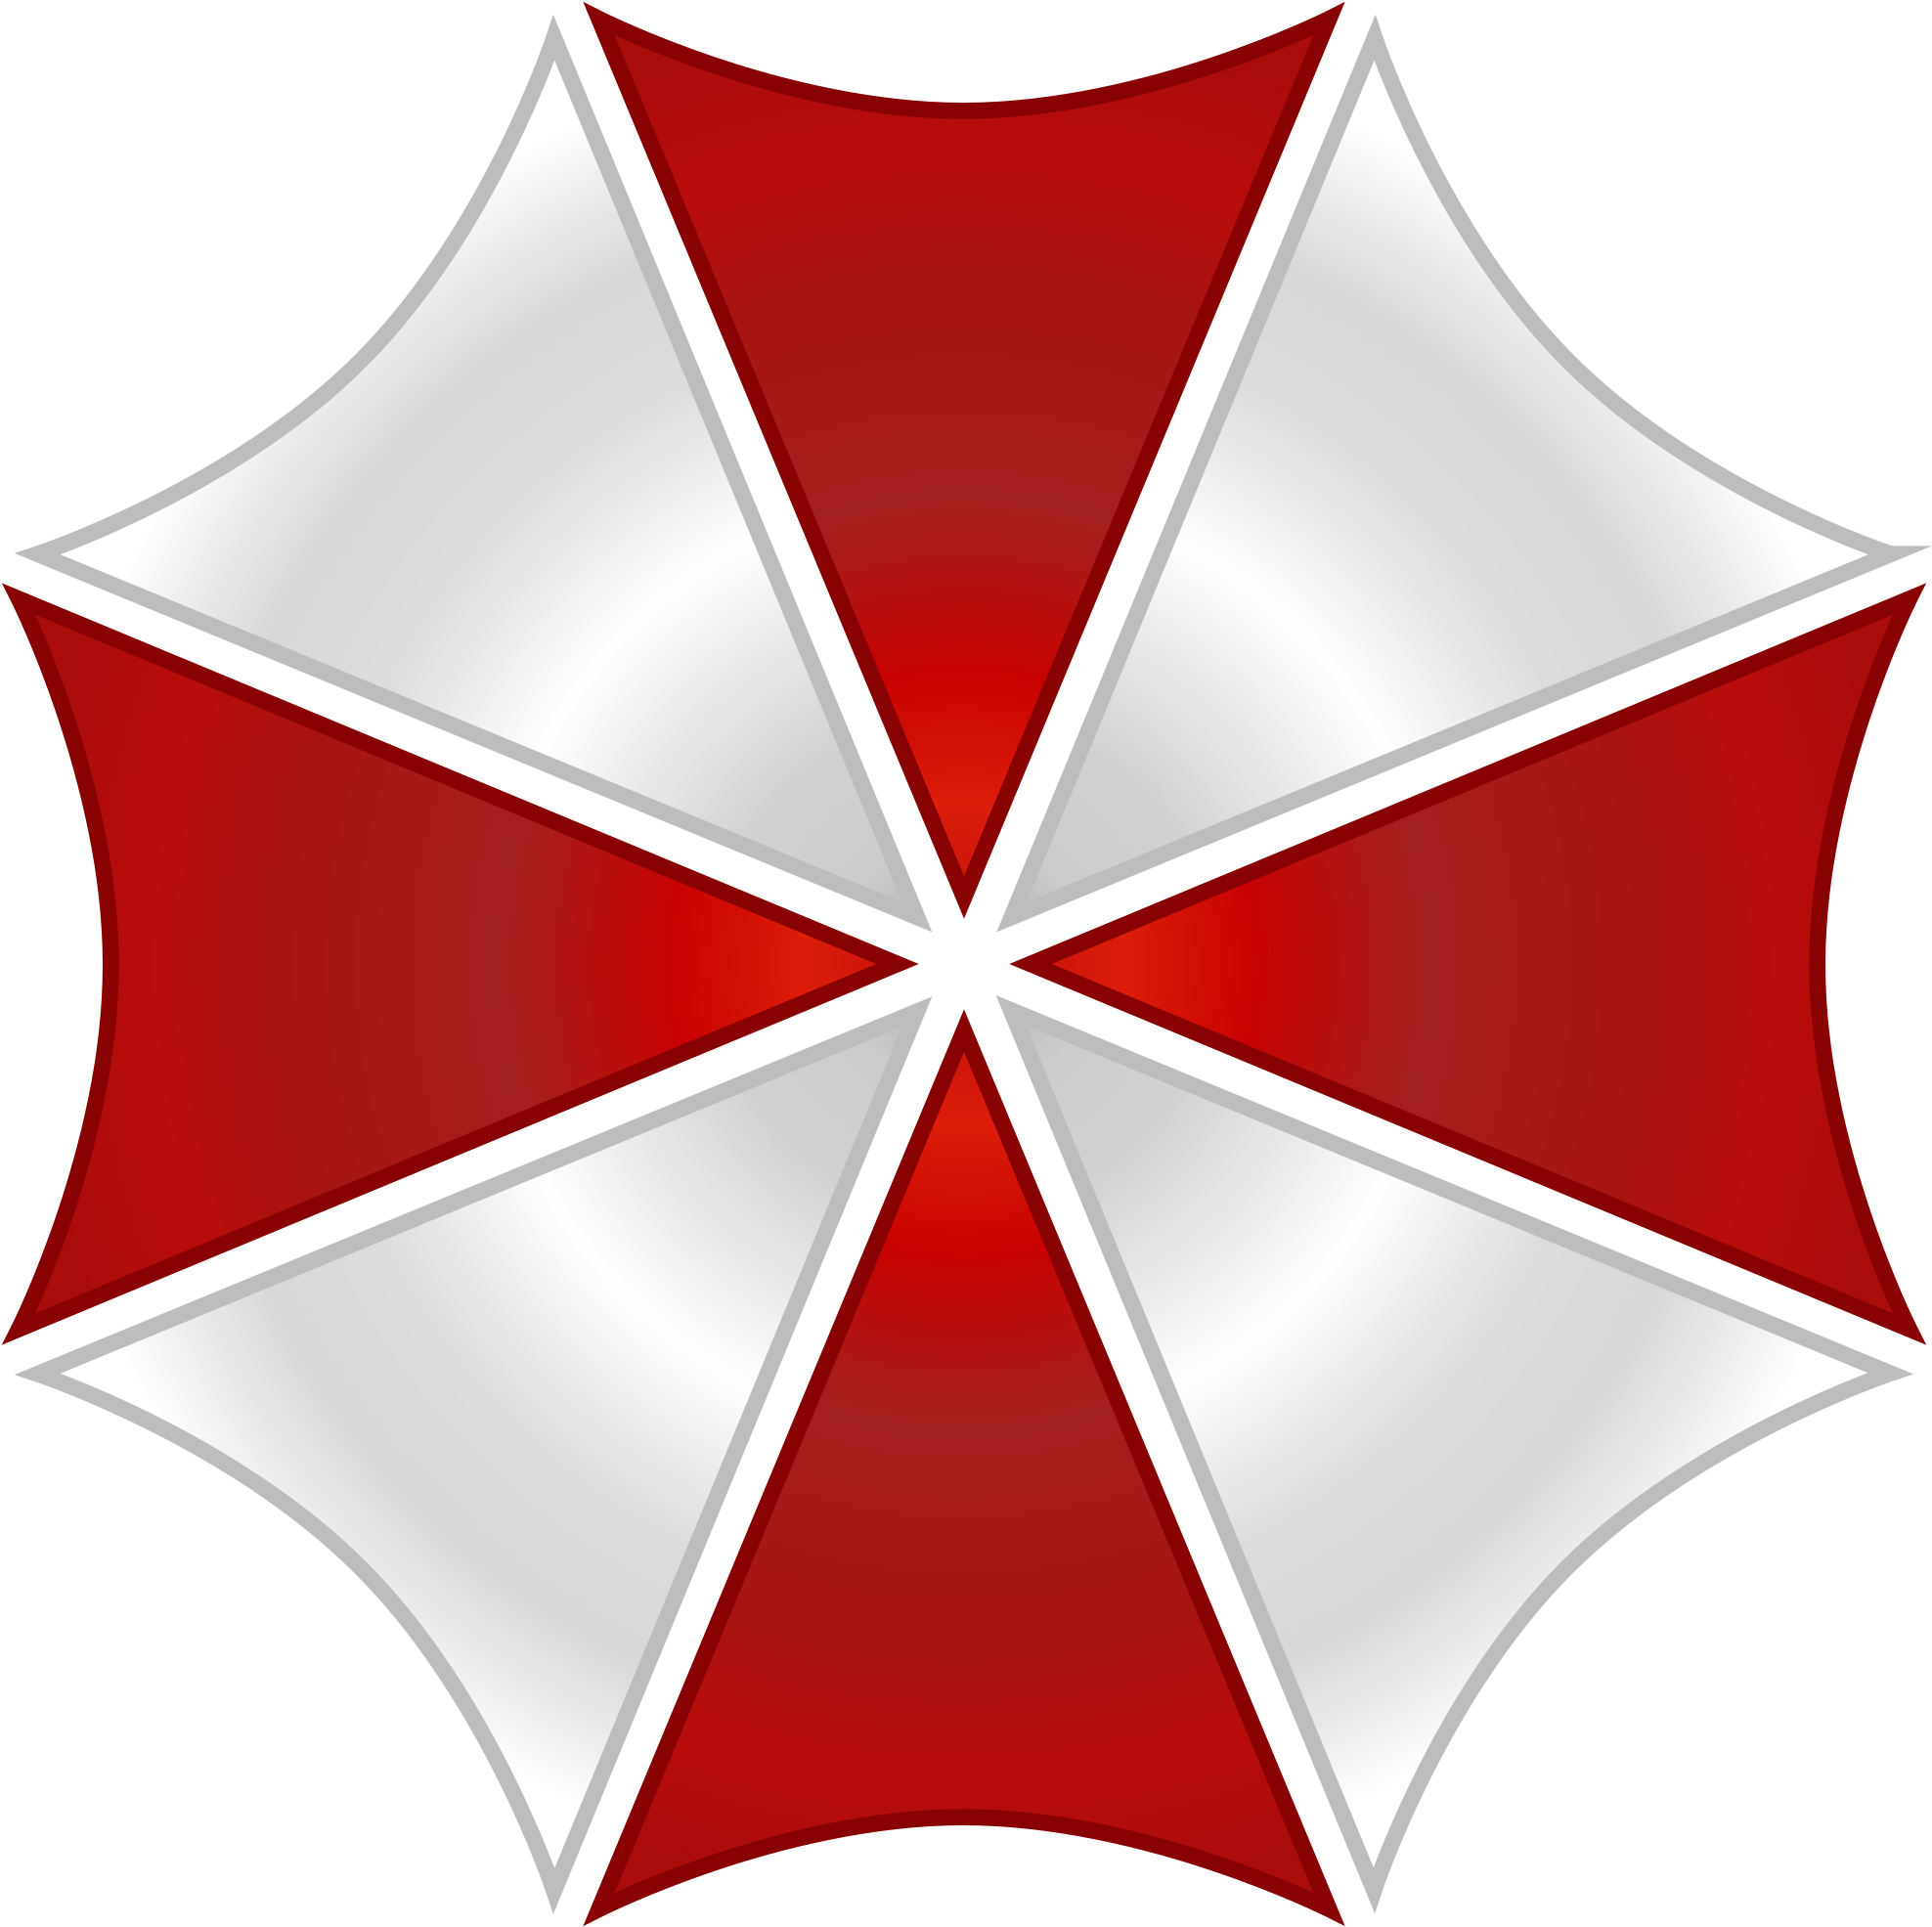 Umbrella Corporation Logo - Umbrella Corporation Logo Png (1024x1024)